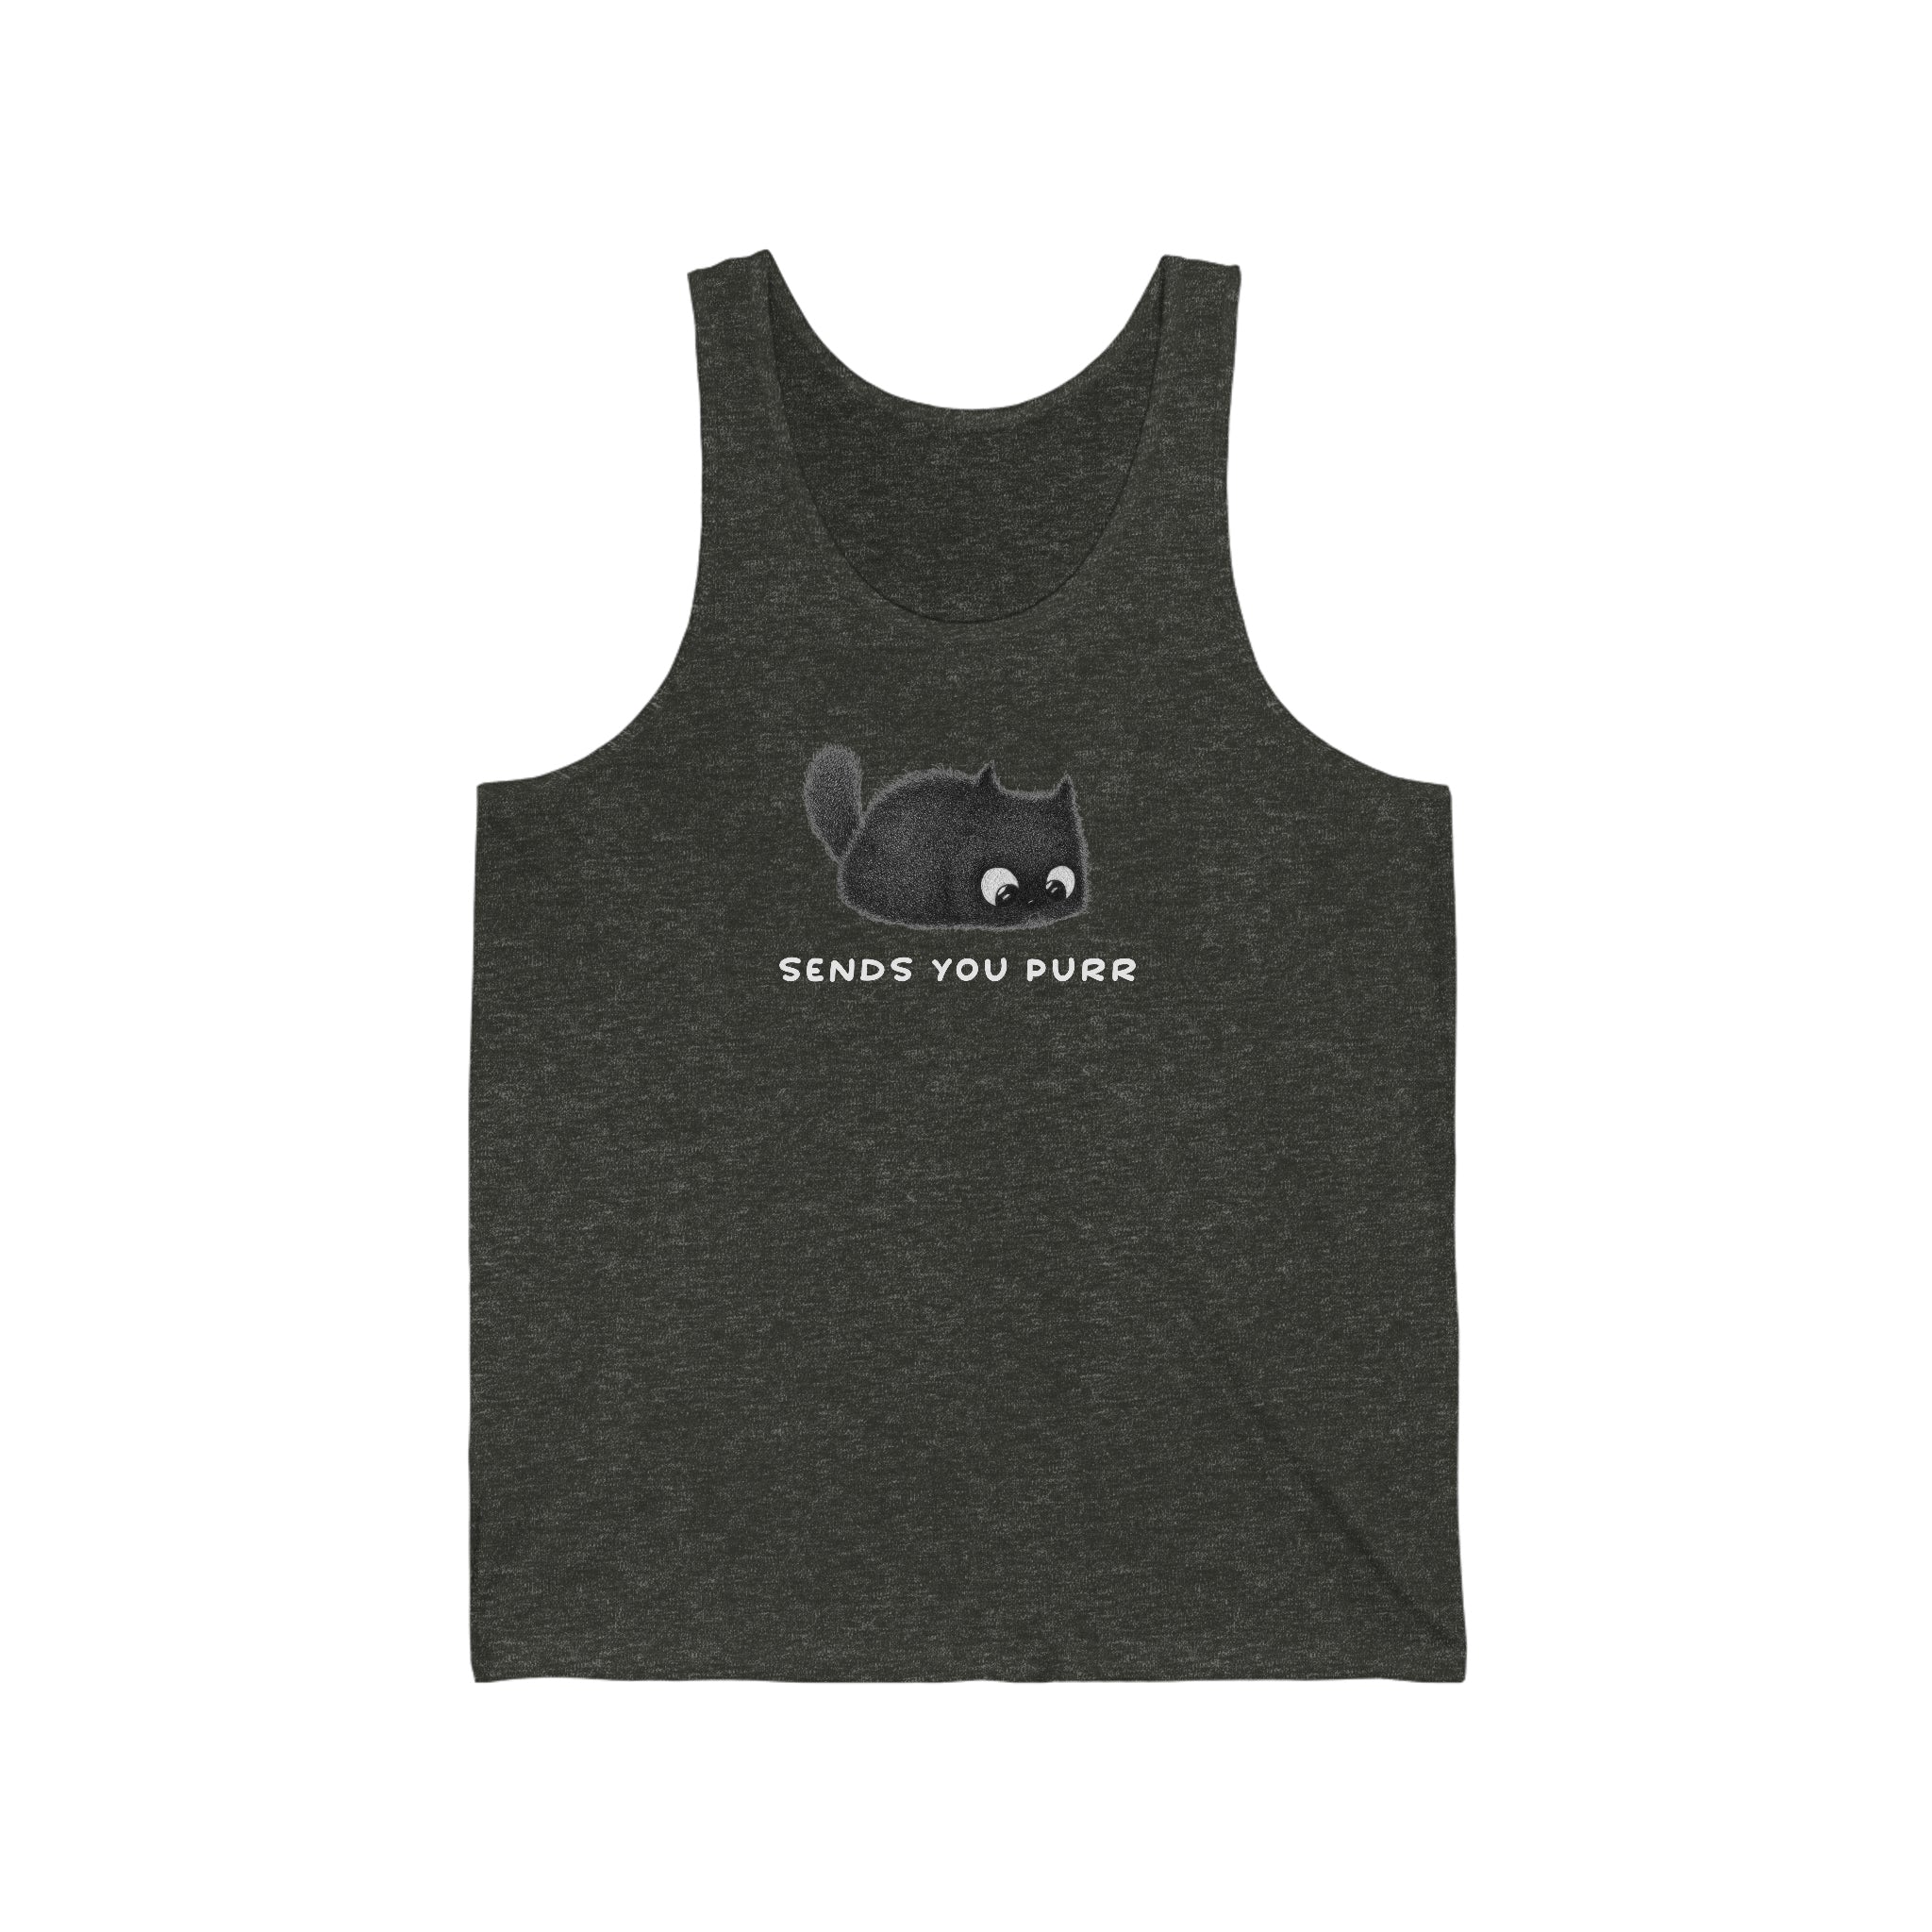 Send You Purr : Unisex 100% Cotton Tank Top by Wholesomememes & Purr In Ink